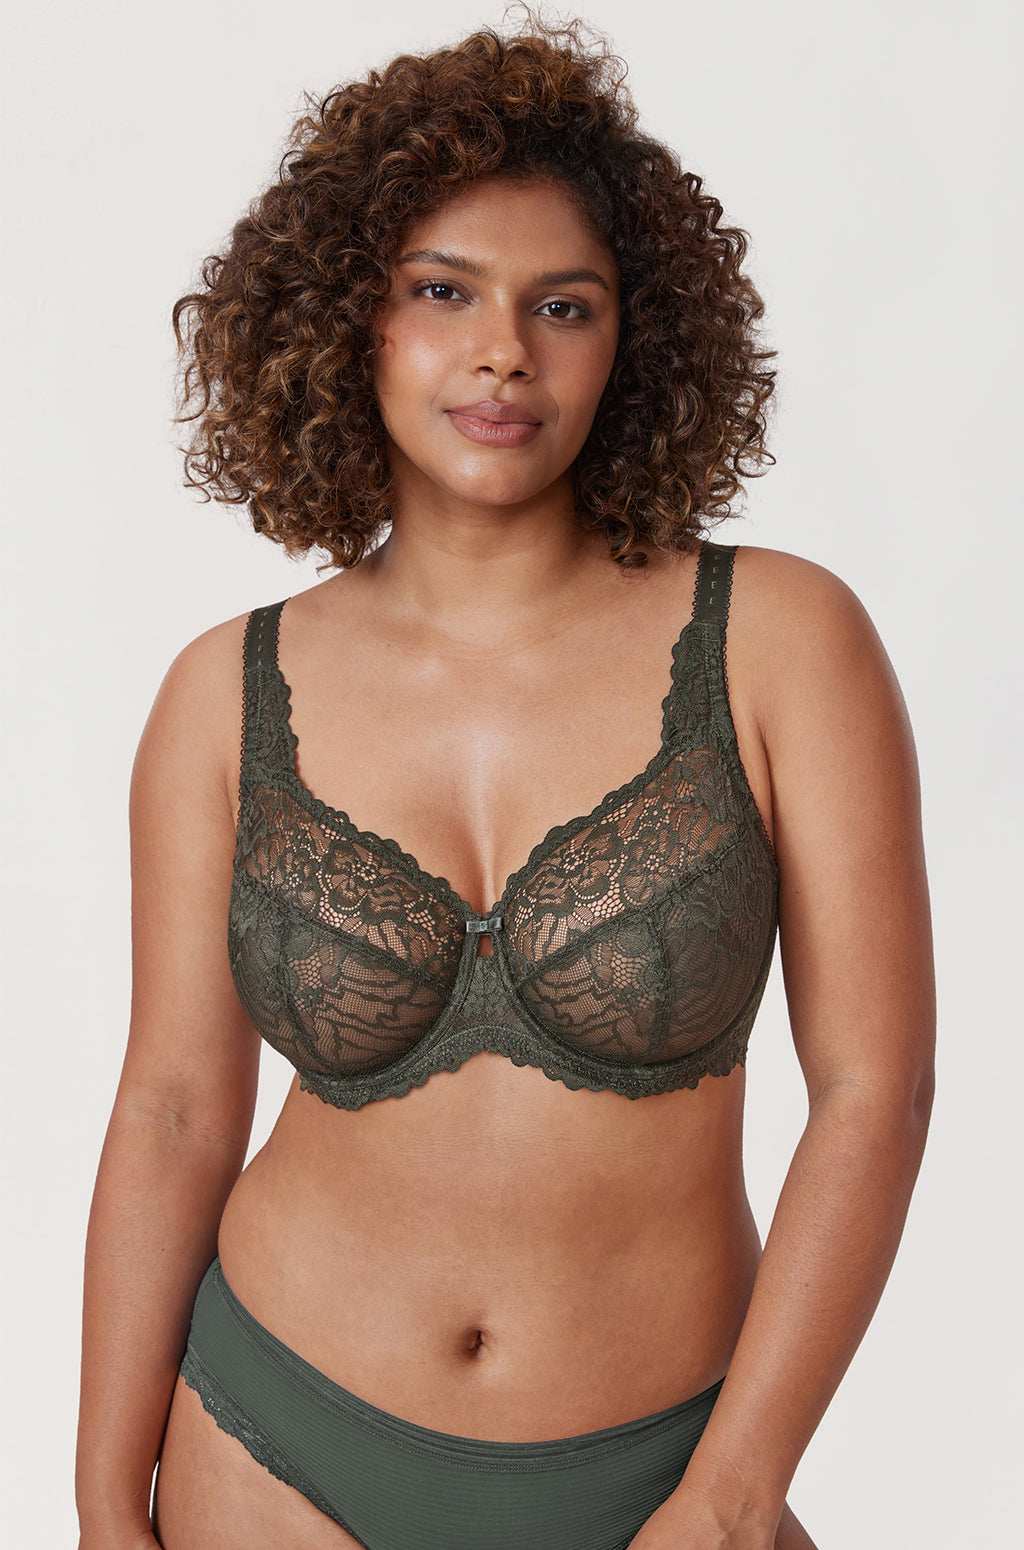 Details of our best-seller Minimizer Bra🖤 Supports sizes up to H cup⁠ ⁠  Shop this bra at the link in the bio or visit delimira.com